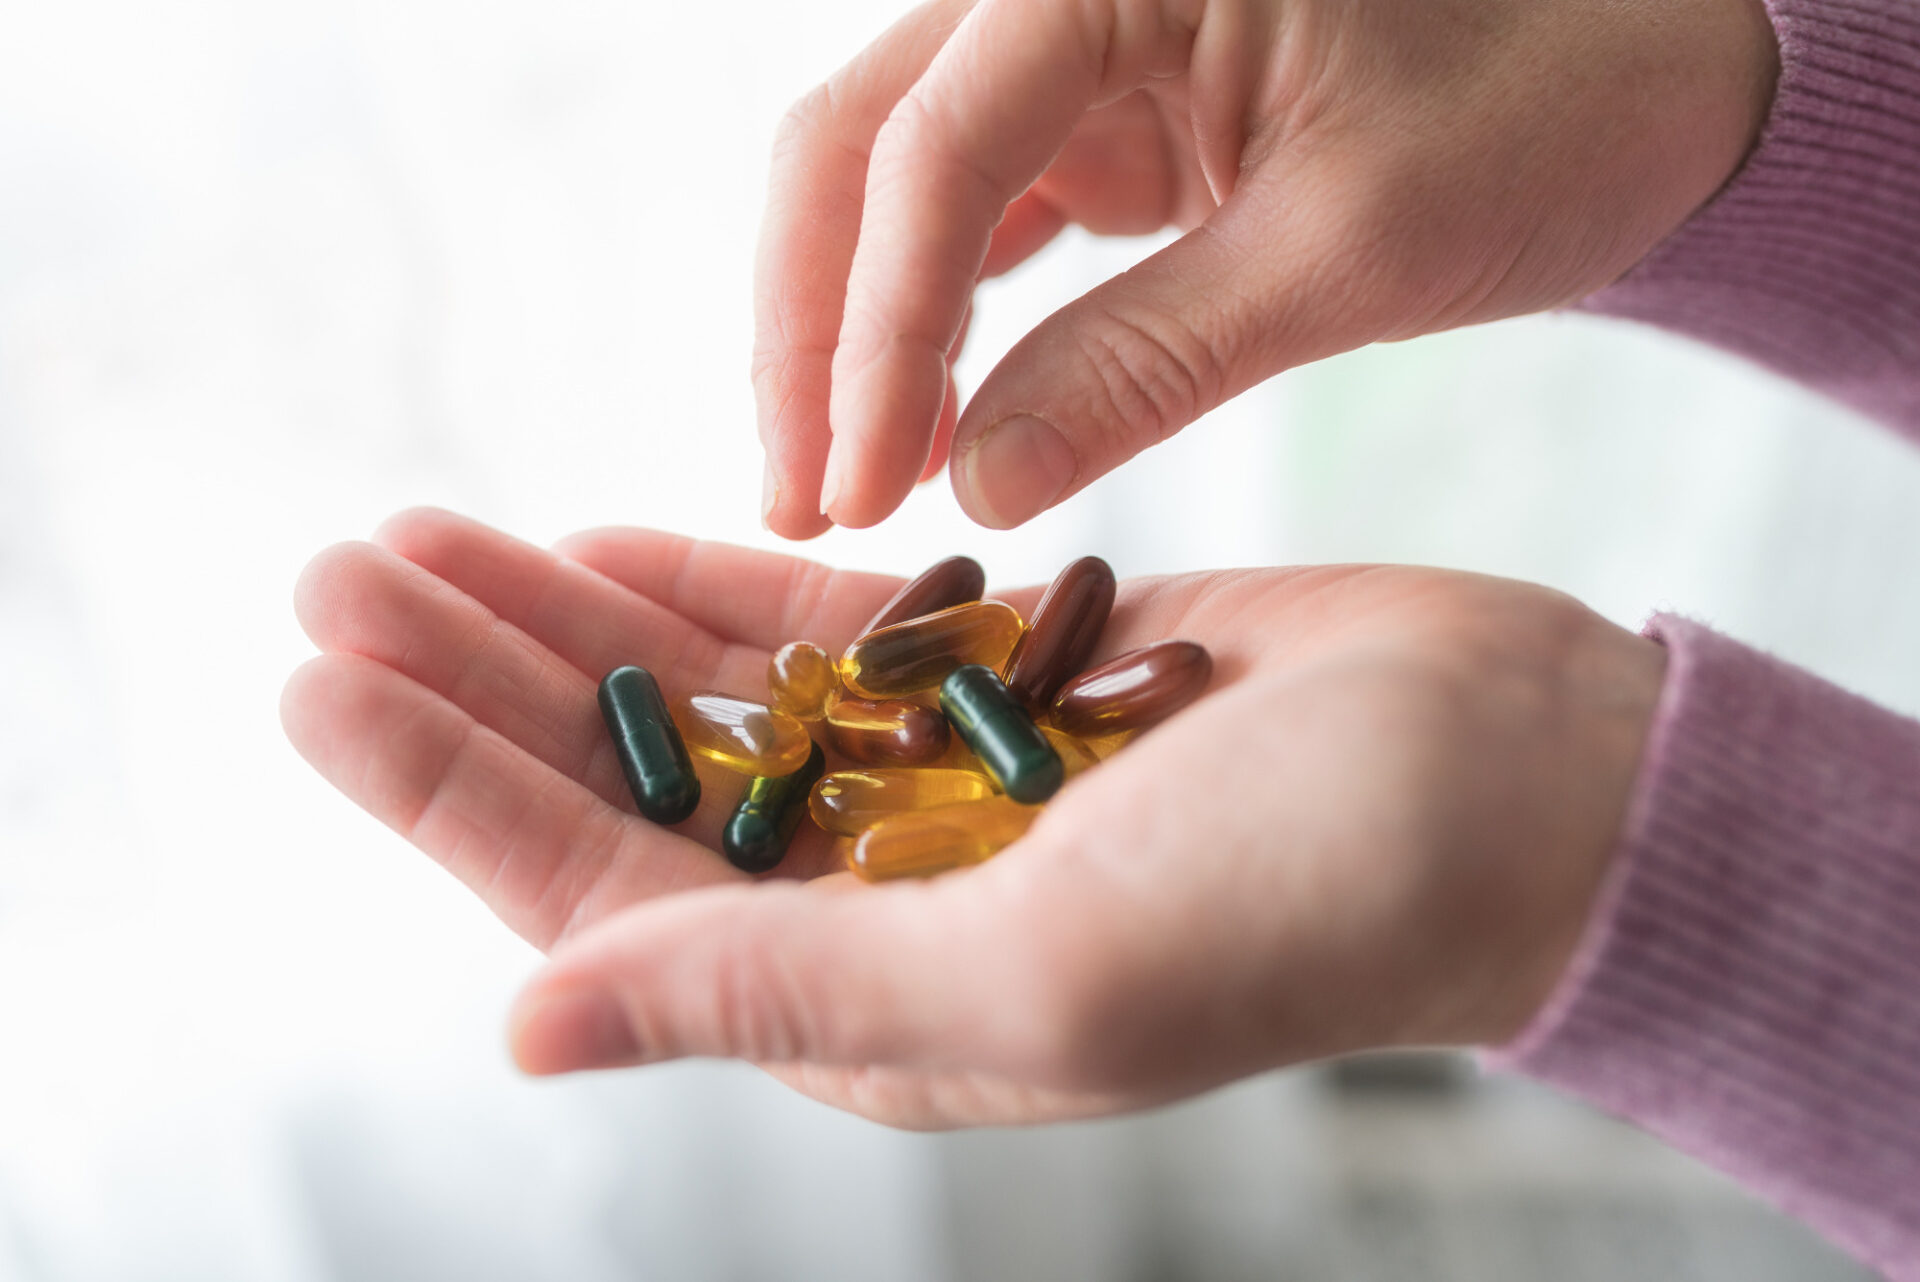 How to Choose Good Supplements (and Avoid Bad Ones)